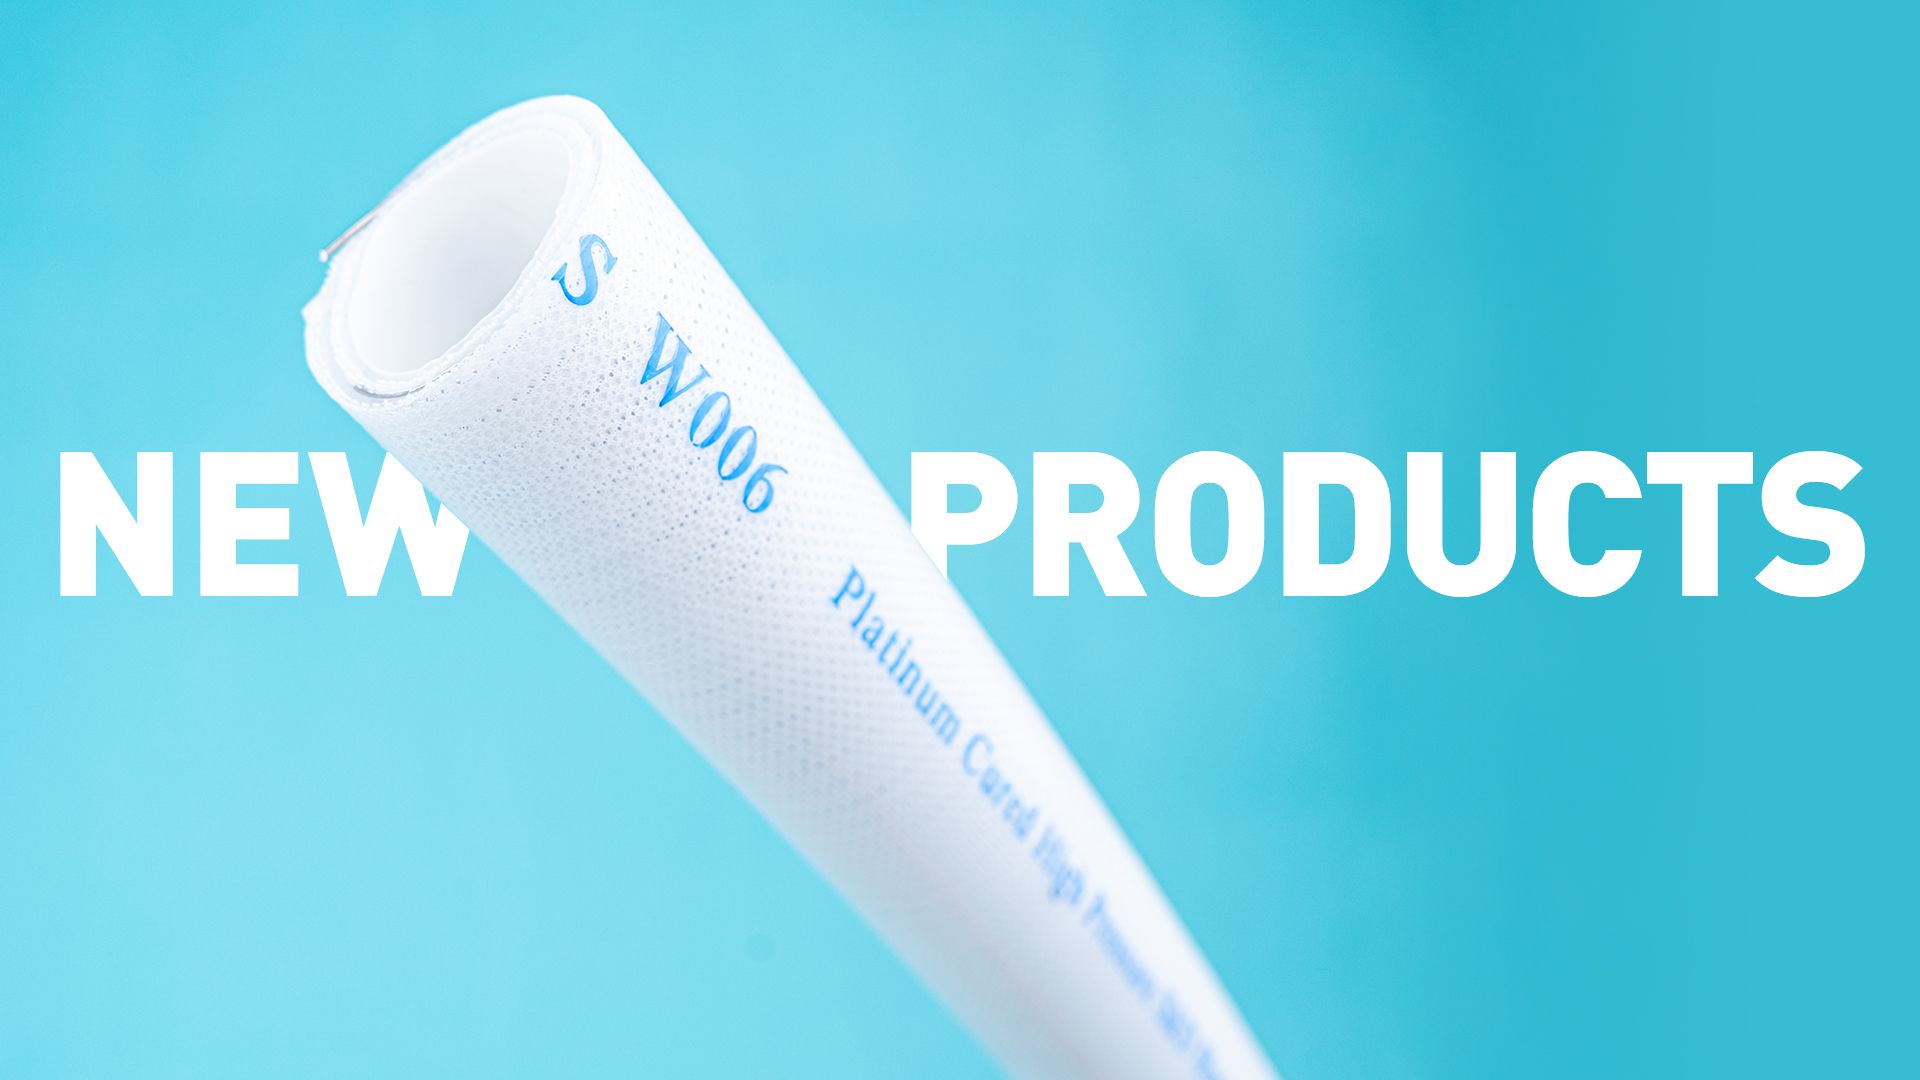 VELON Silicone Rubber Hoses: Your Ultimate Partner for High-Purity Applications